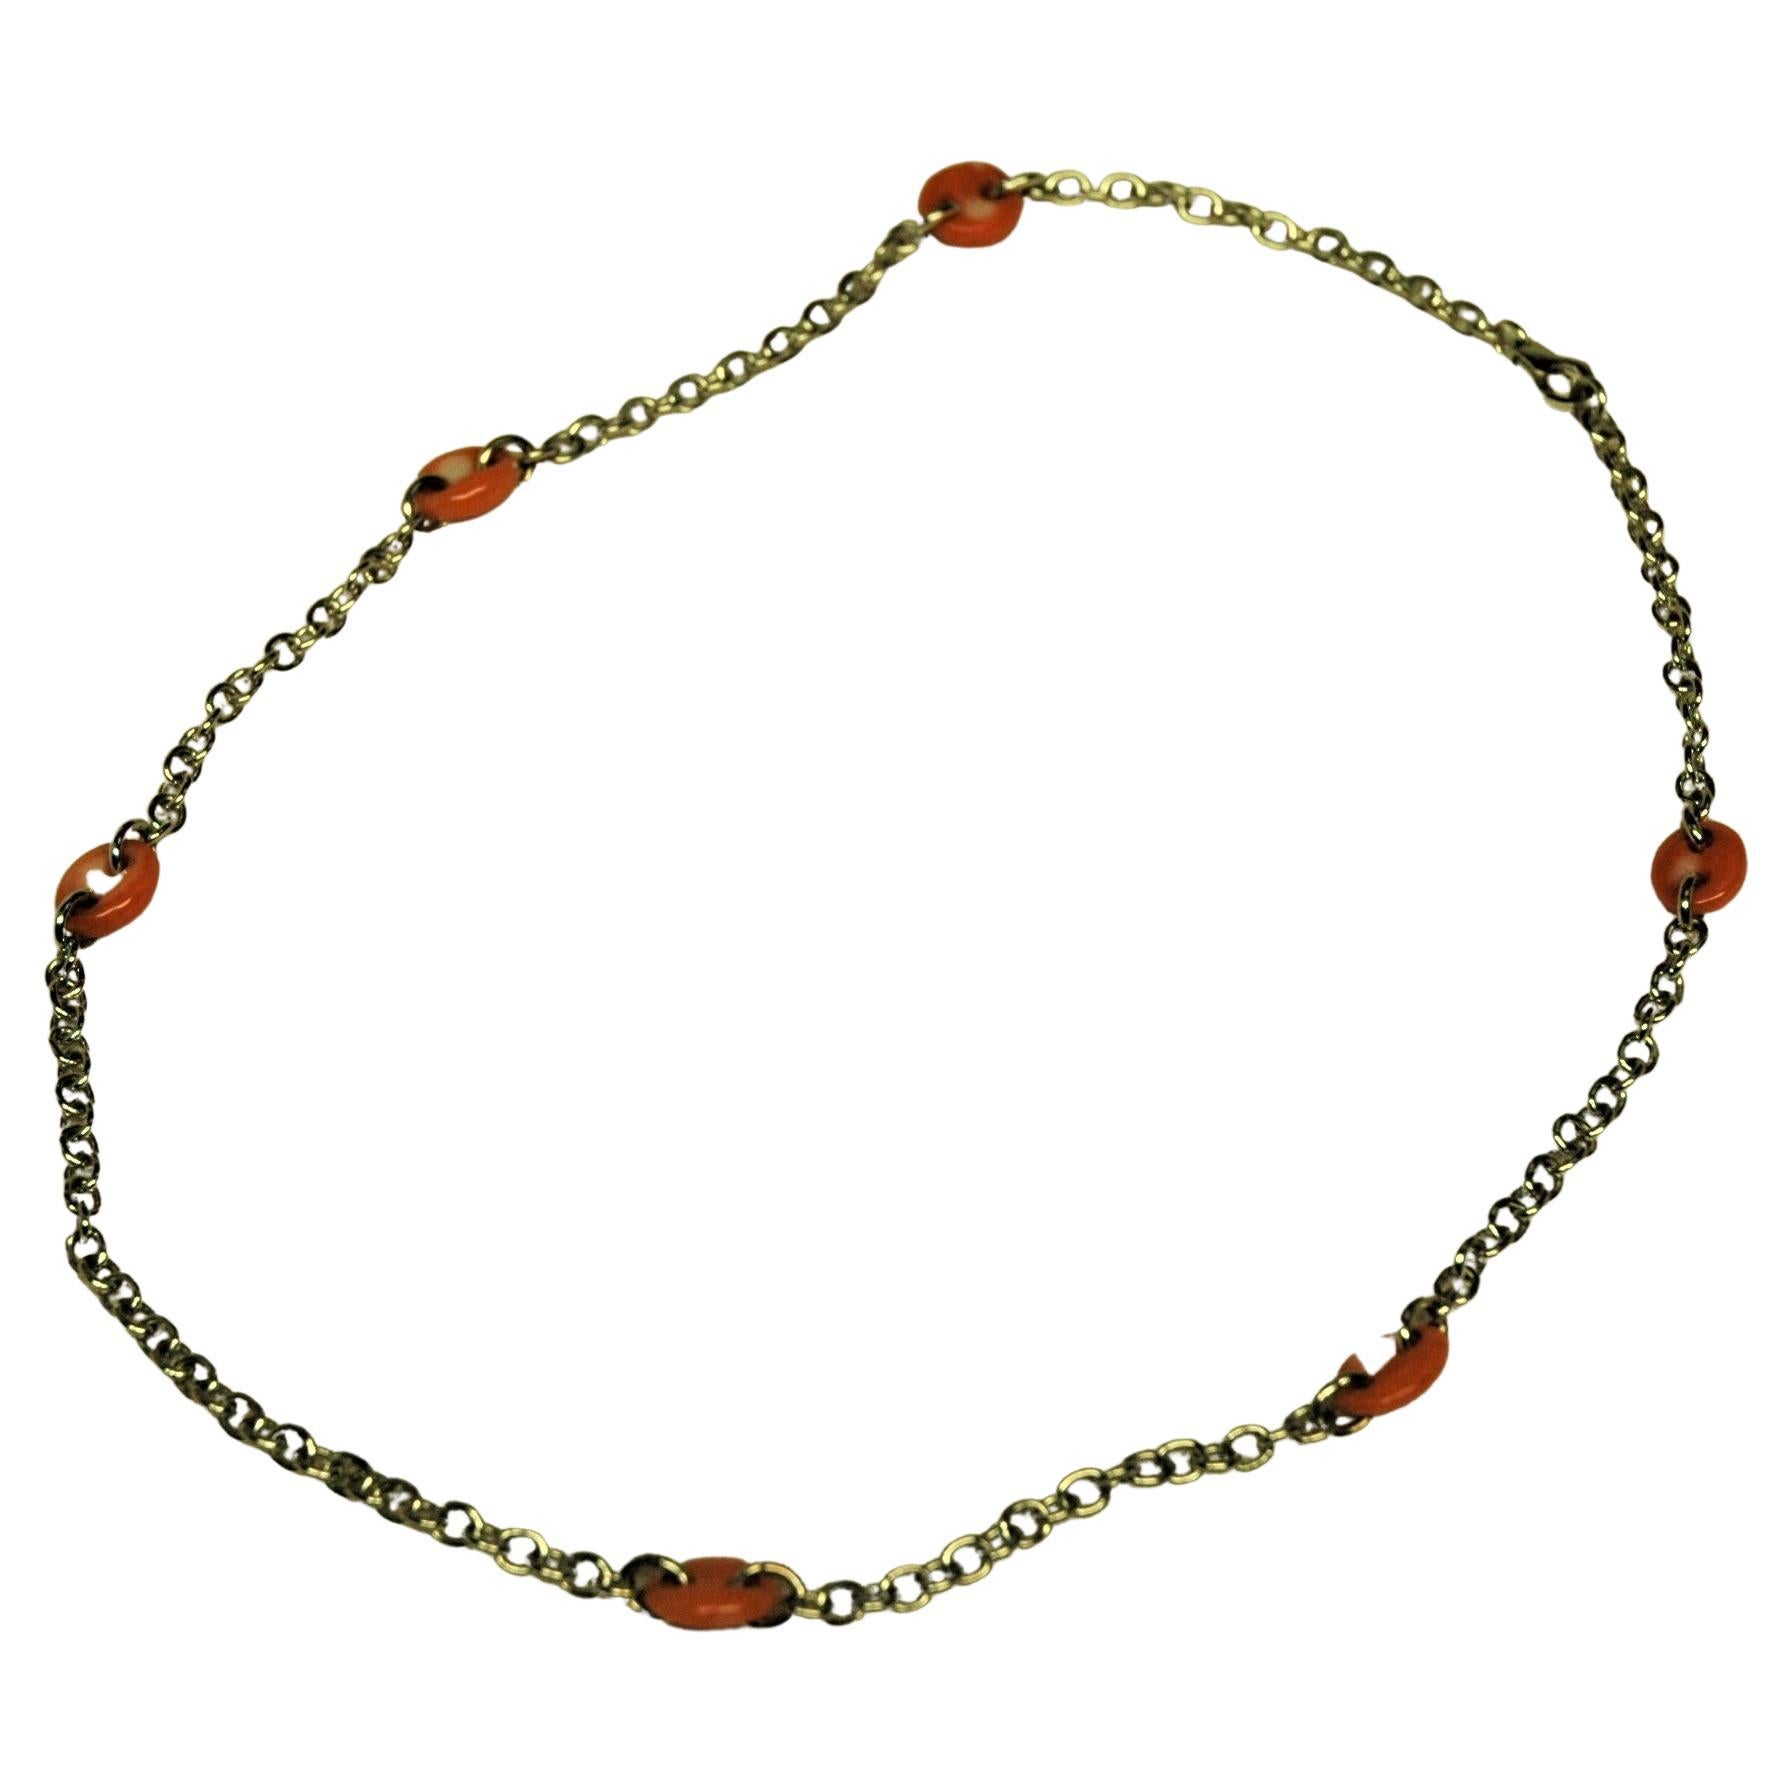 18 Kt. White Gold Chain Necklace with Natural Coral Elements